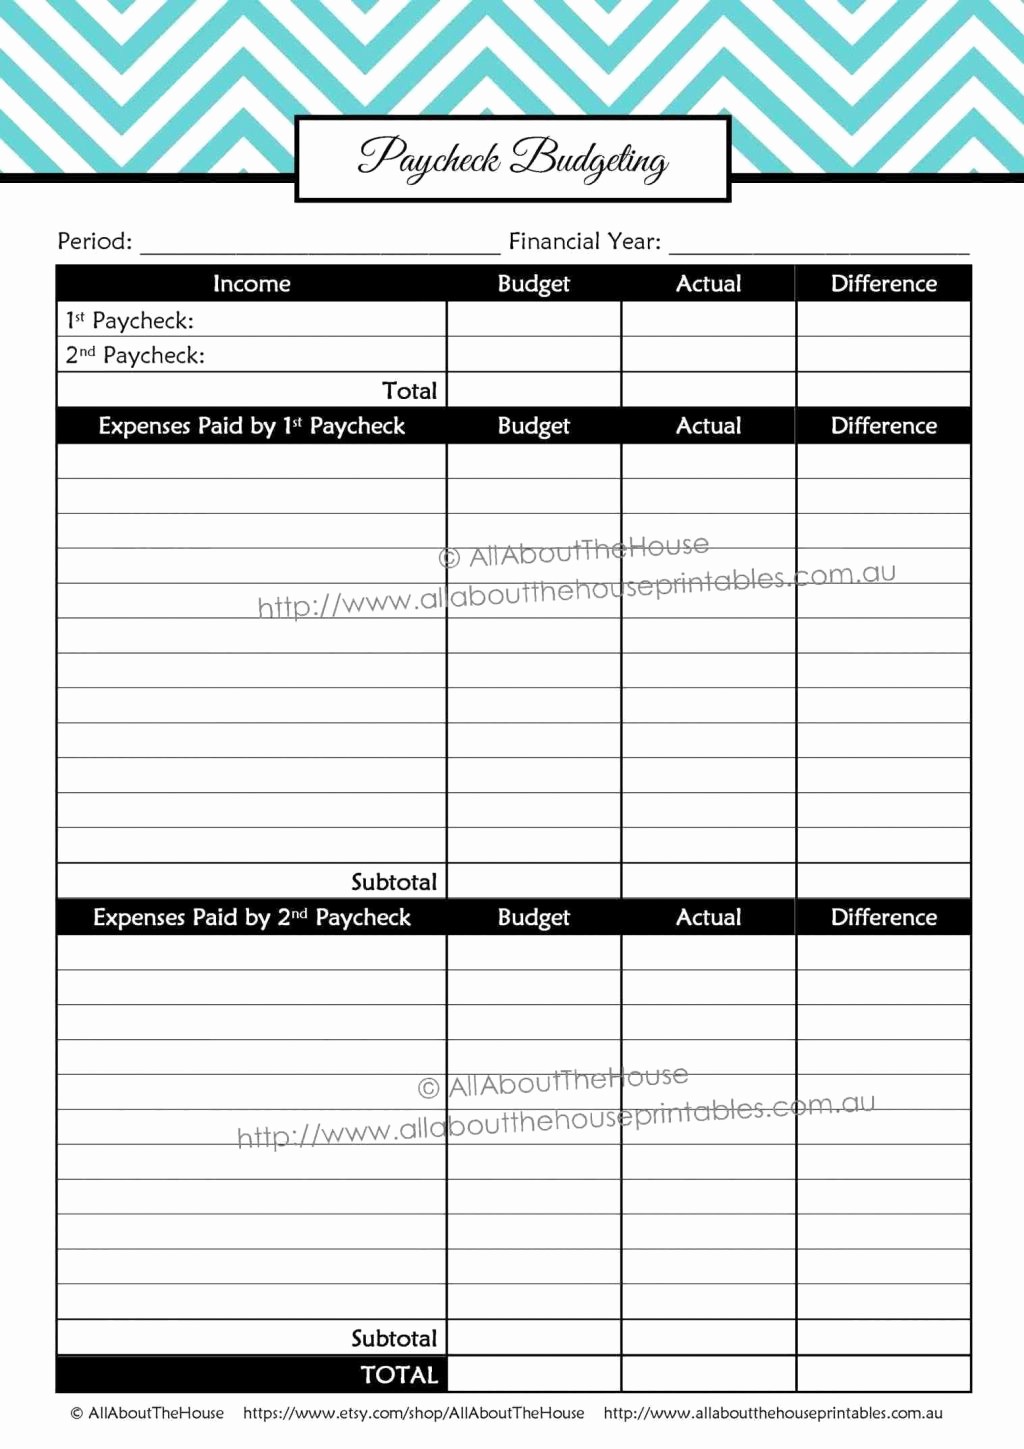 Startup Expenses and Capitalization Spreadsheet Best Of Startup Expenses Template Sample Worksheets Business Costs